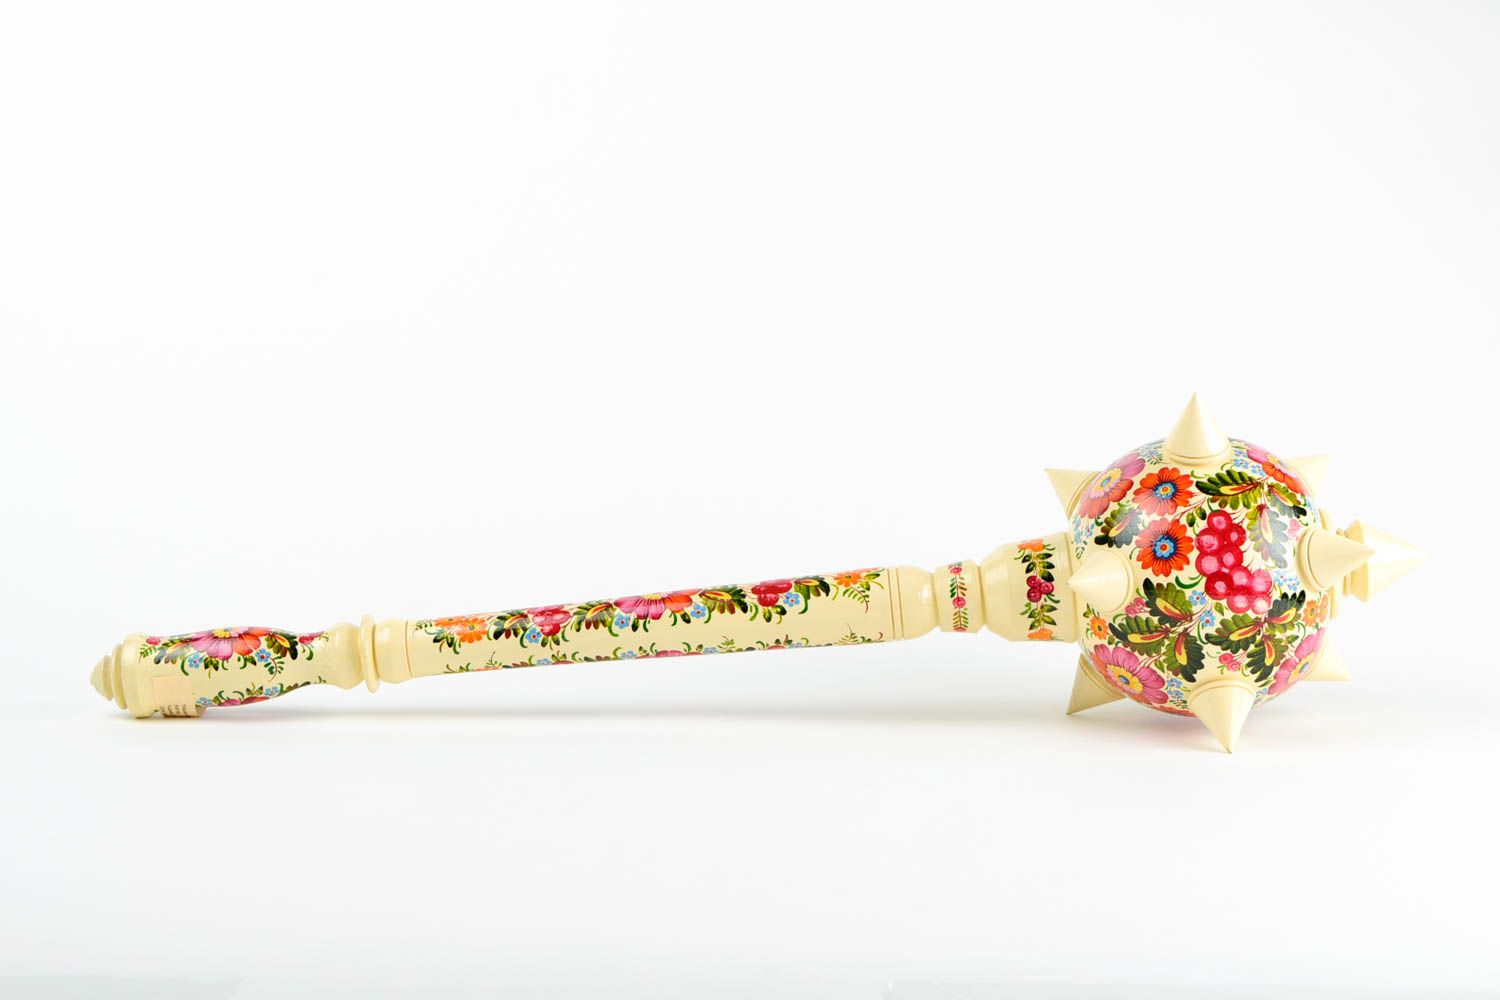 Handmade painted mace wooden mace decorative weapon decorative use only photo 2